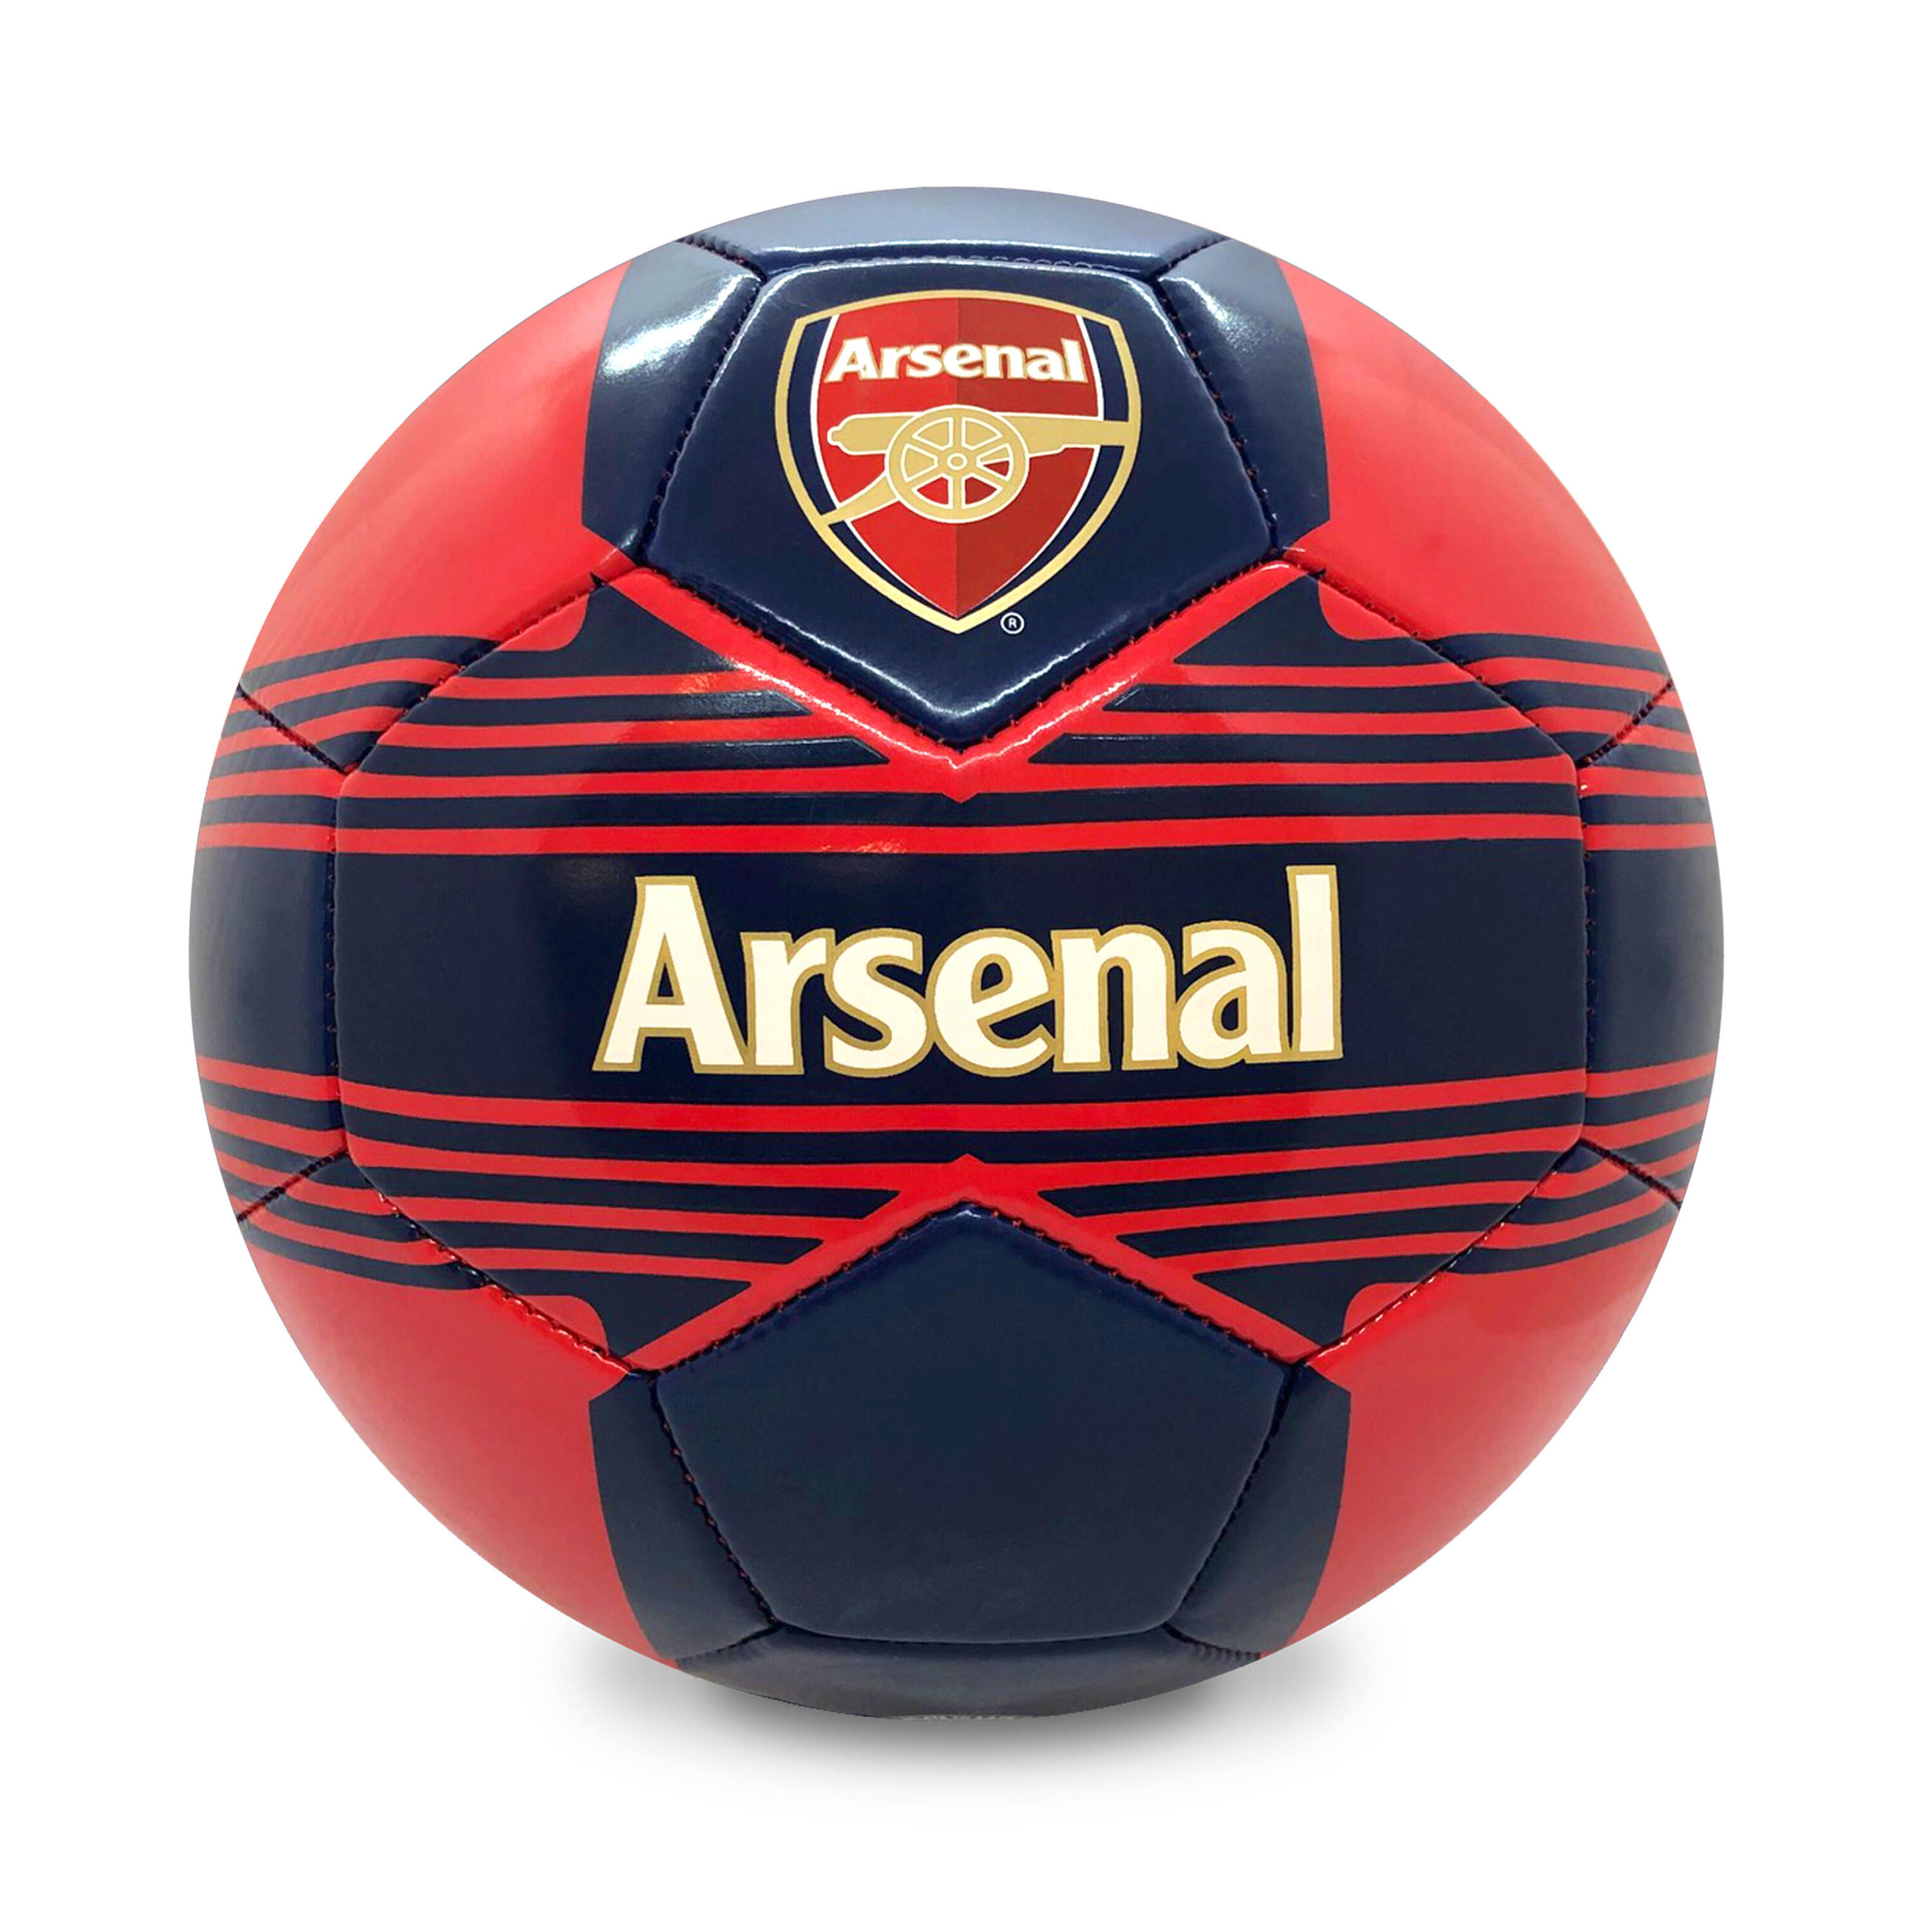 ARSENAL Arsenal FC Football Size 4 Crest Red OFFICIAL Gift